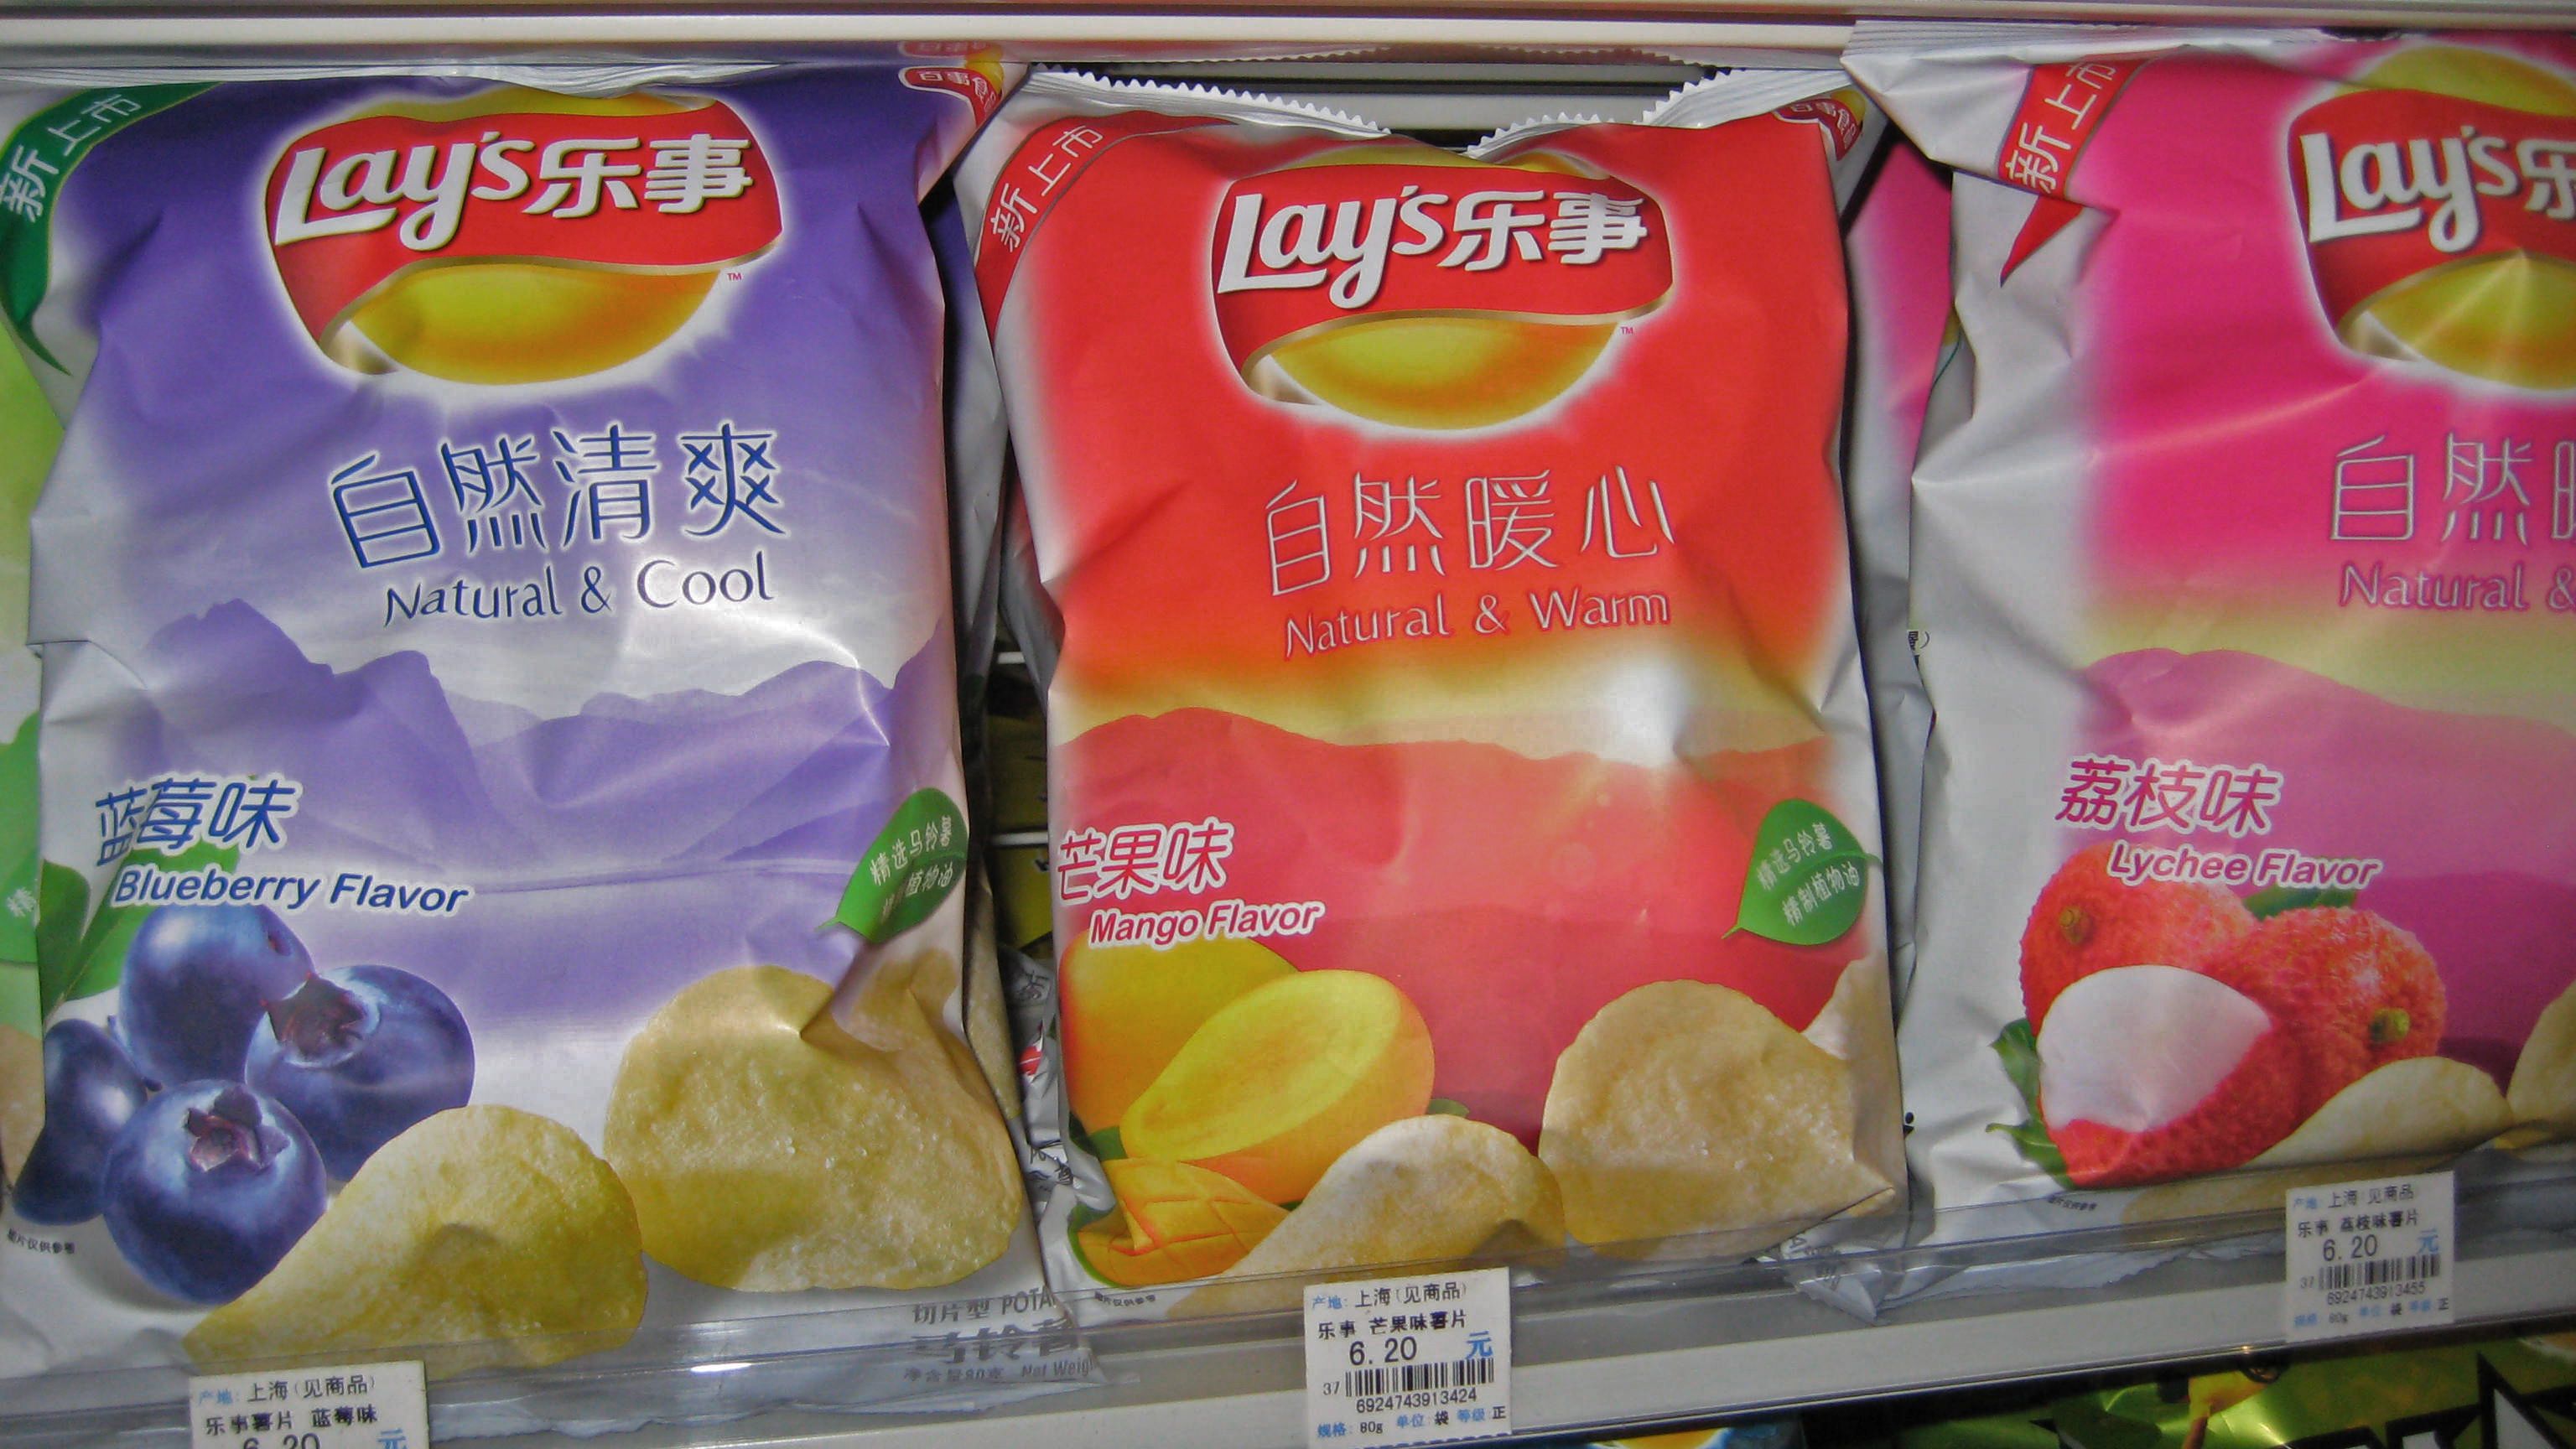 12 Things You Need To Know Before Eating Another Bag of Lay's